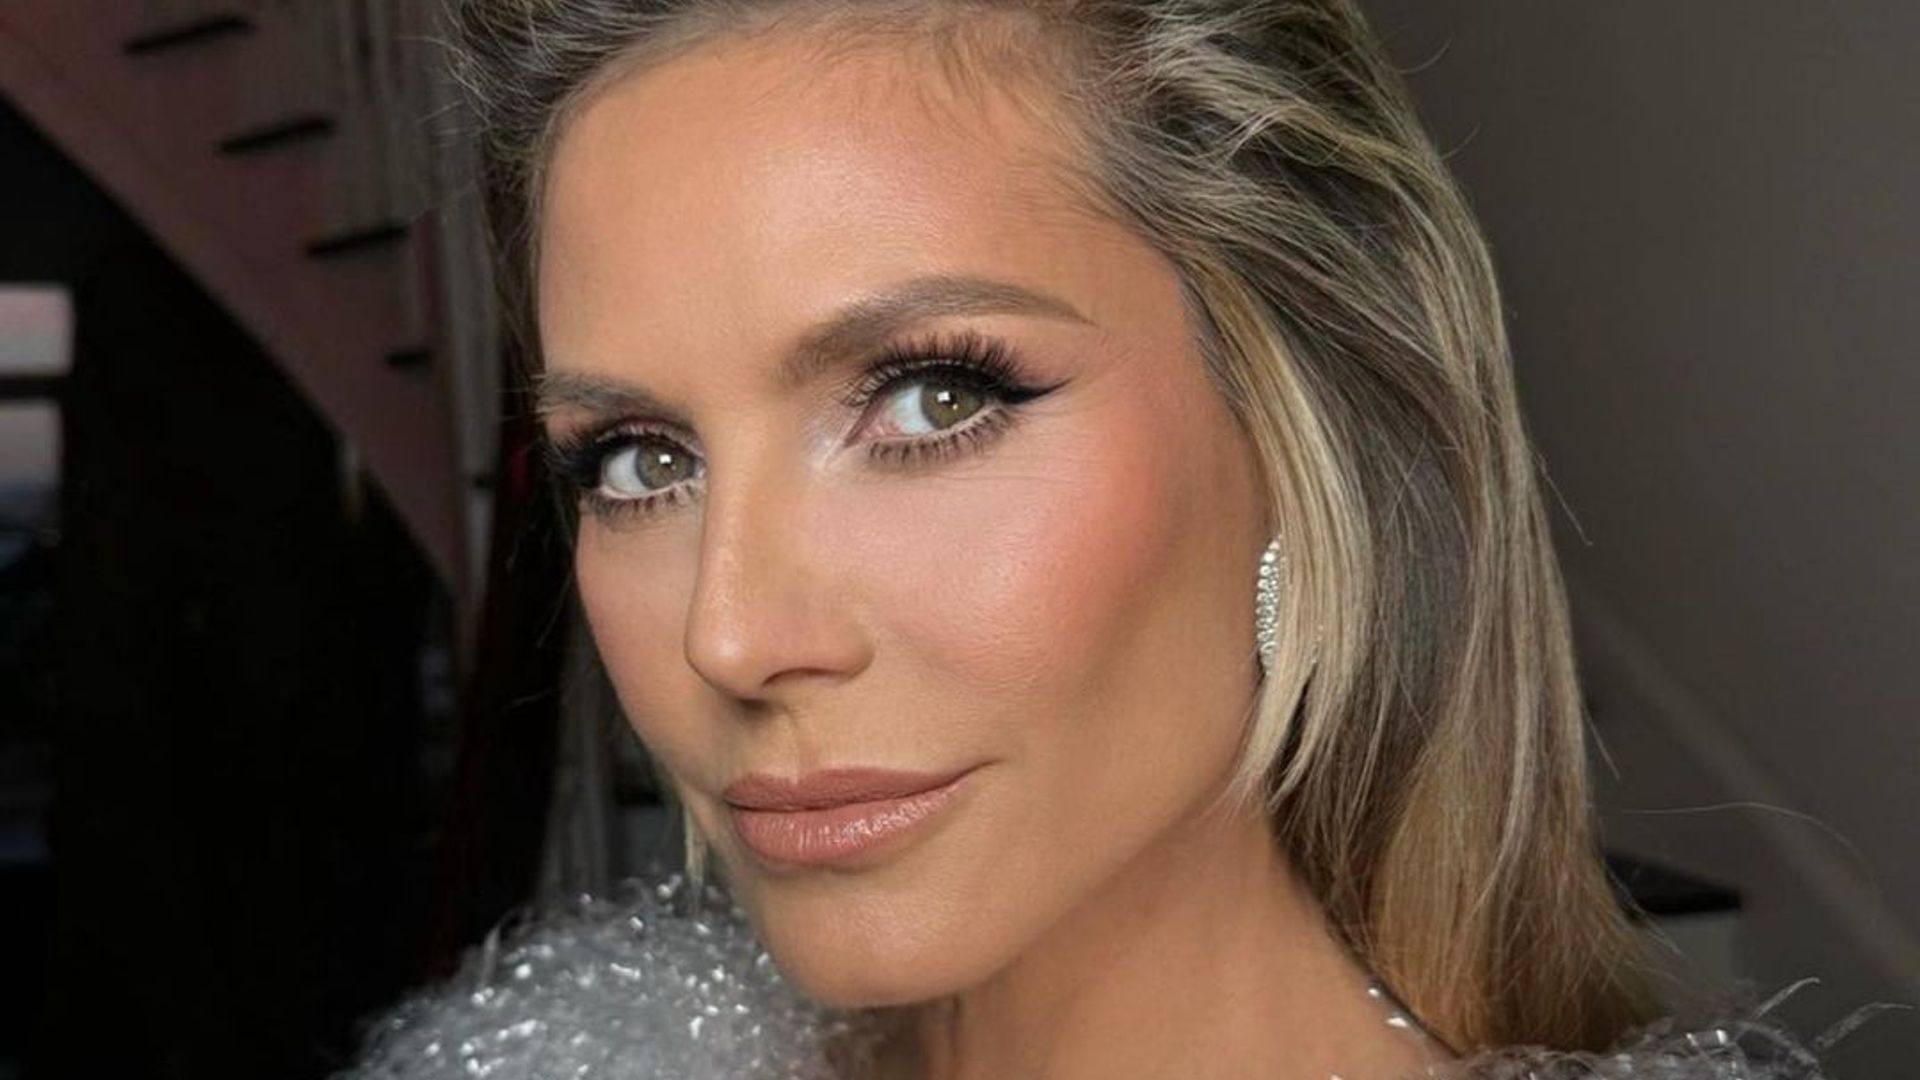 Heidi Klum beauty close up with glamorous makeup and hair transformation 